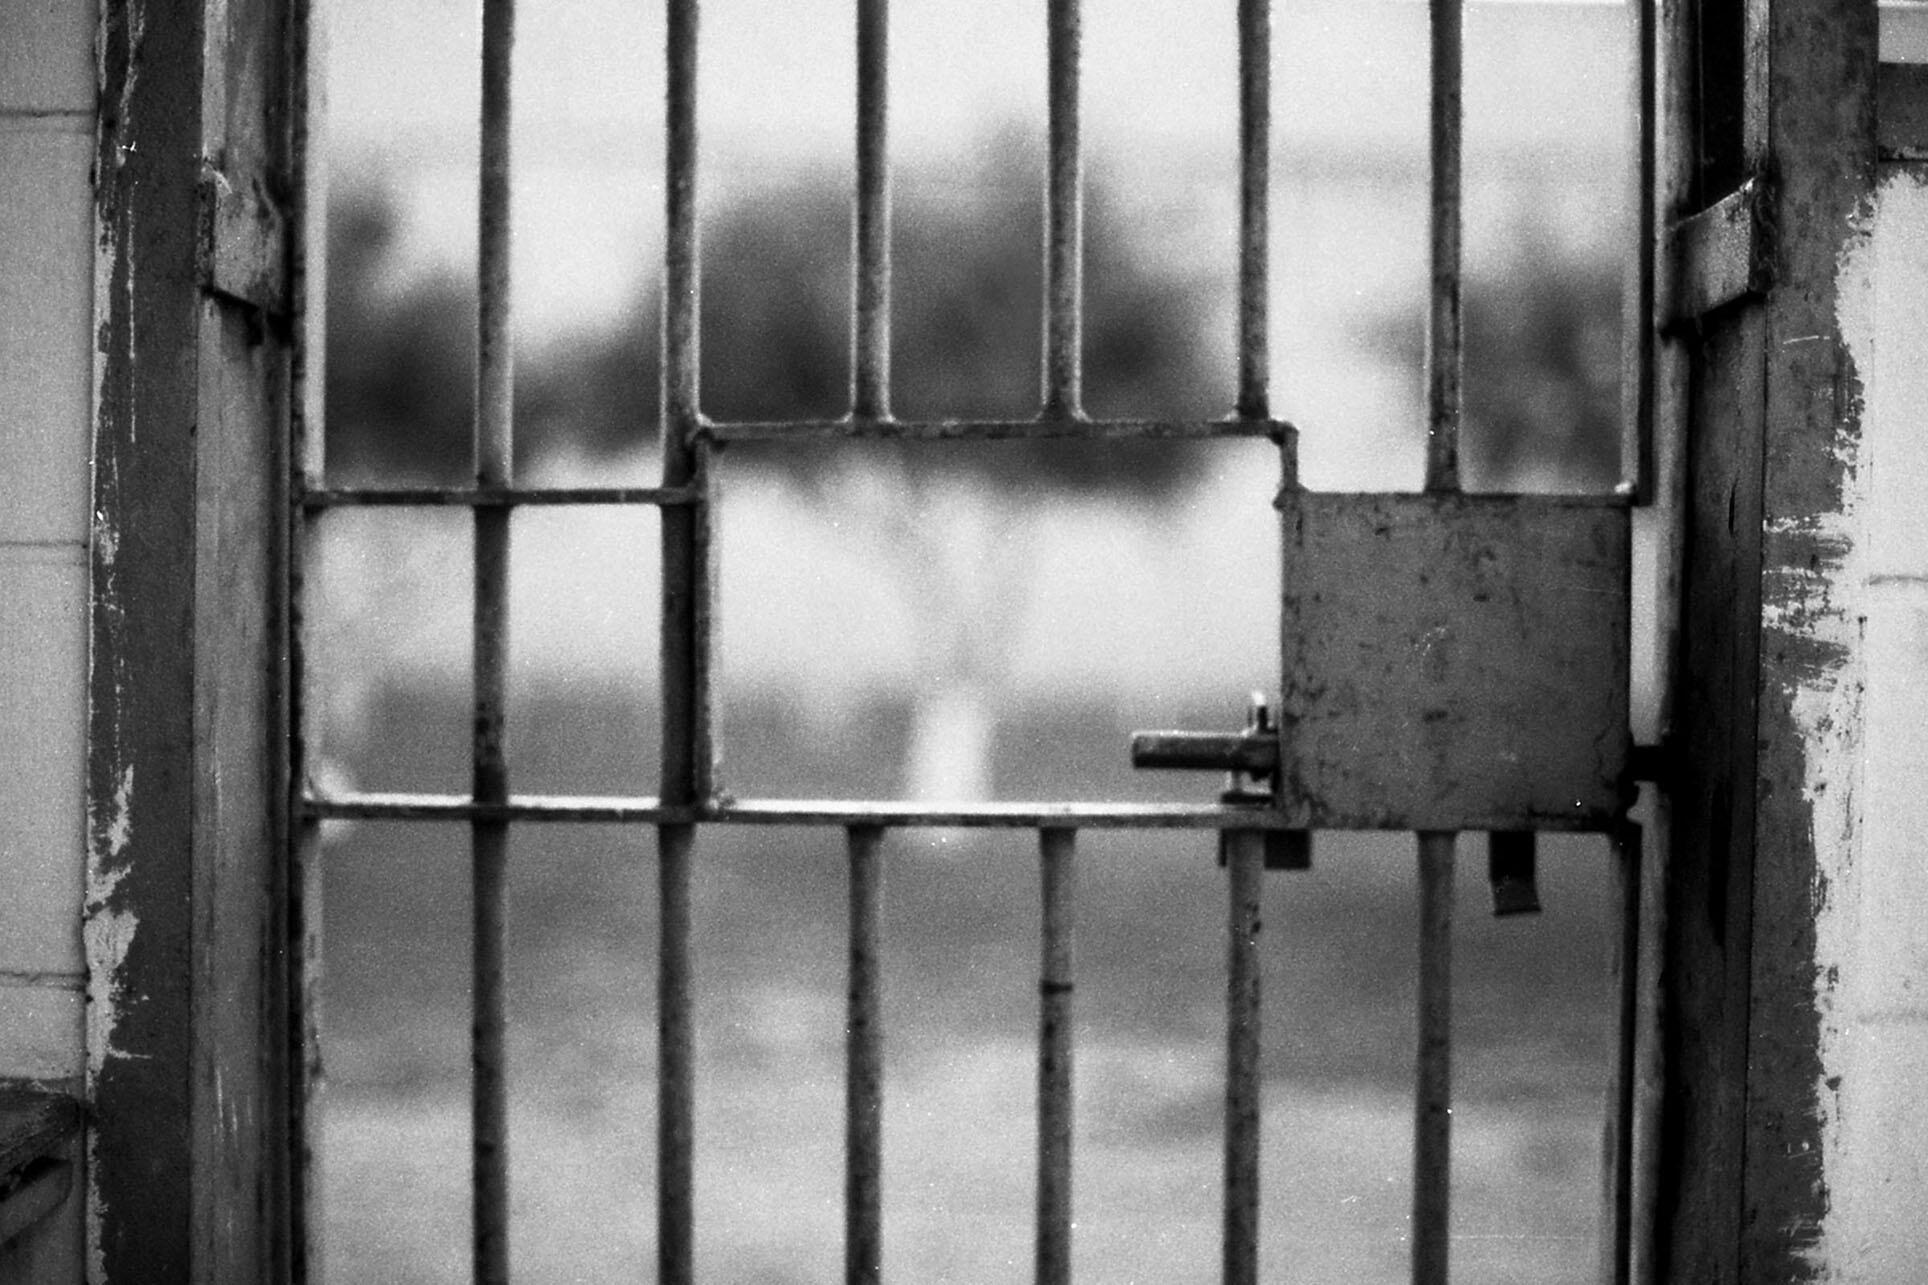 The door of a jail cell, Campana Prison,  Argentina. (Photo by AnsIlta Grizas, www.ansIltagrizas.com.ar.)